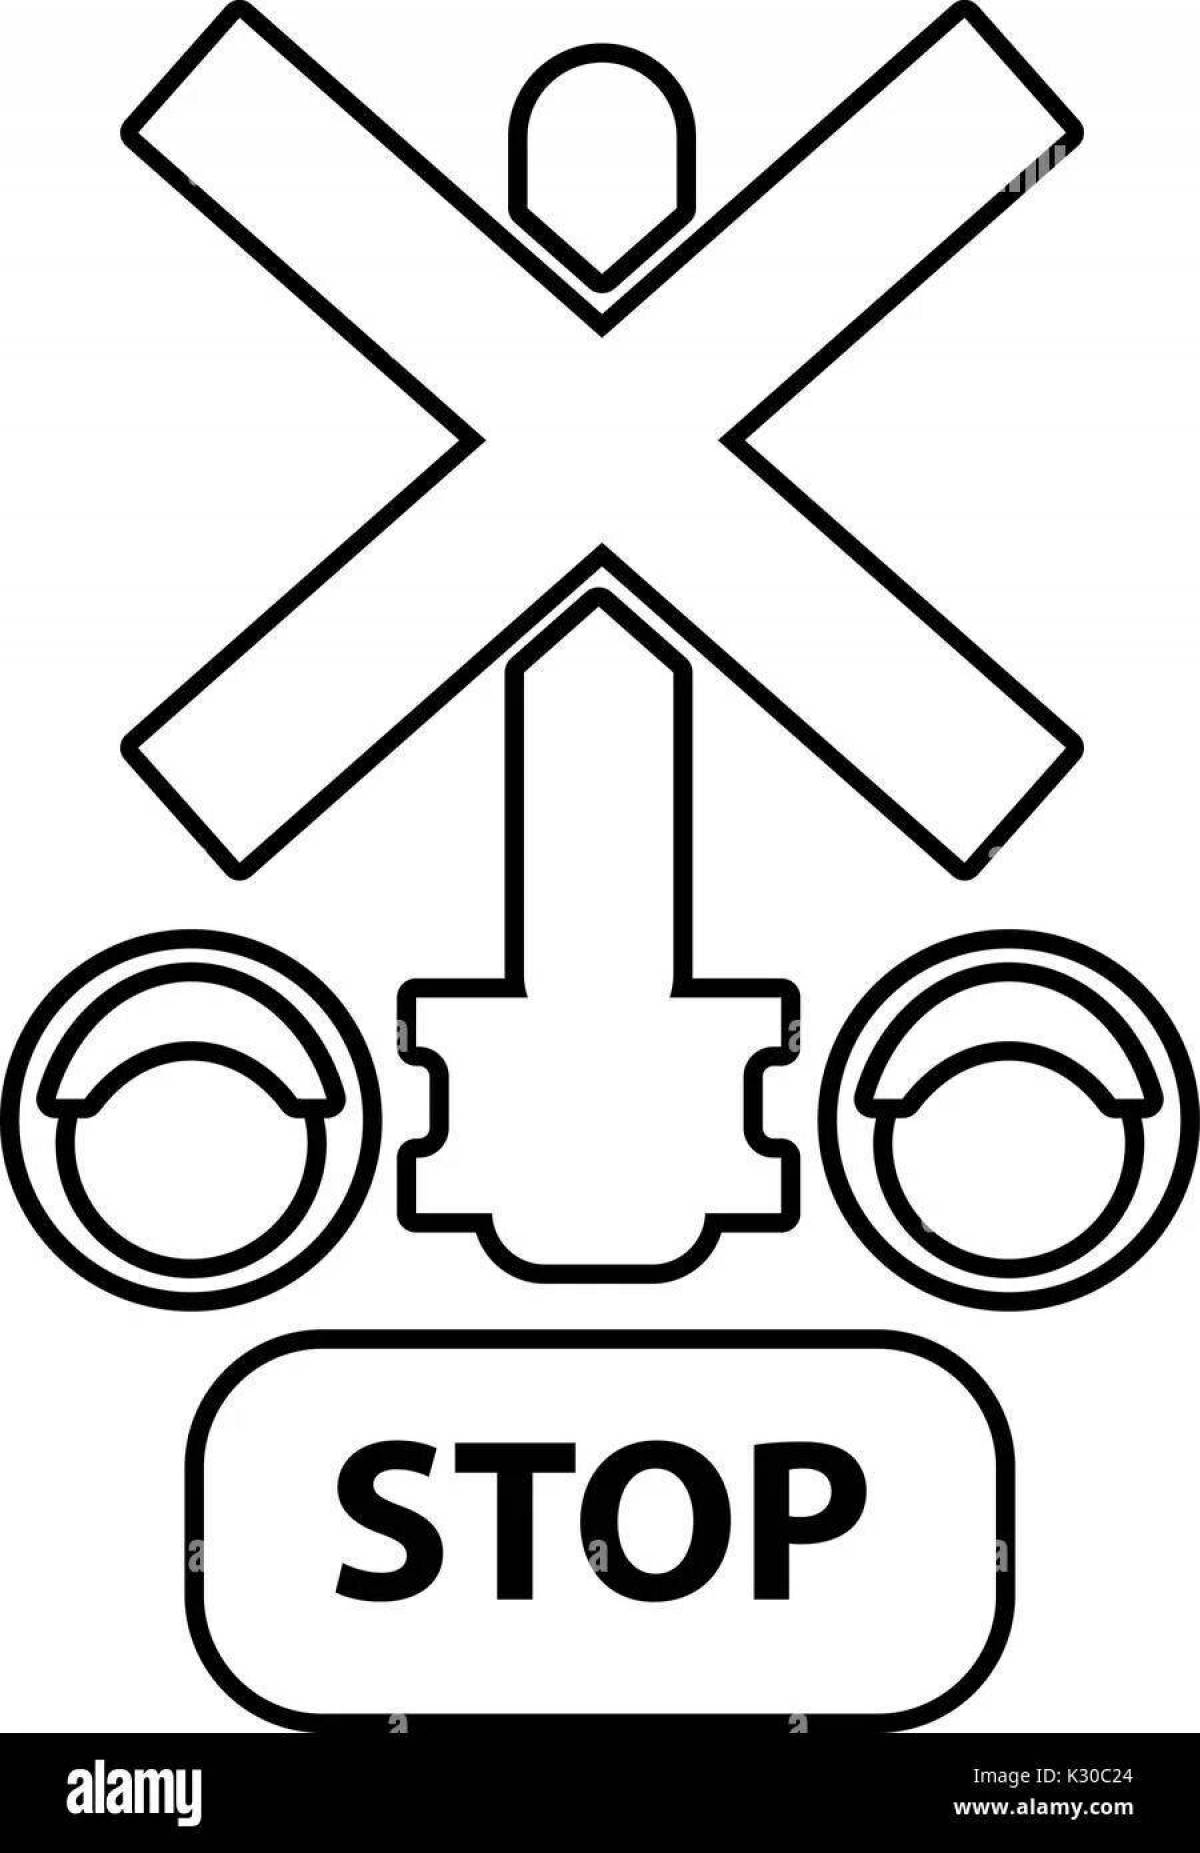 Coloring page striking railroad crossing